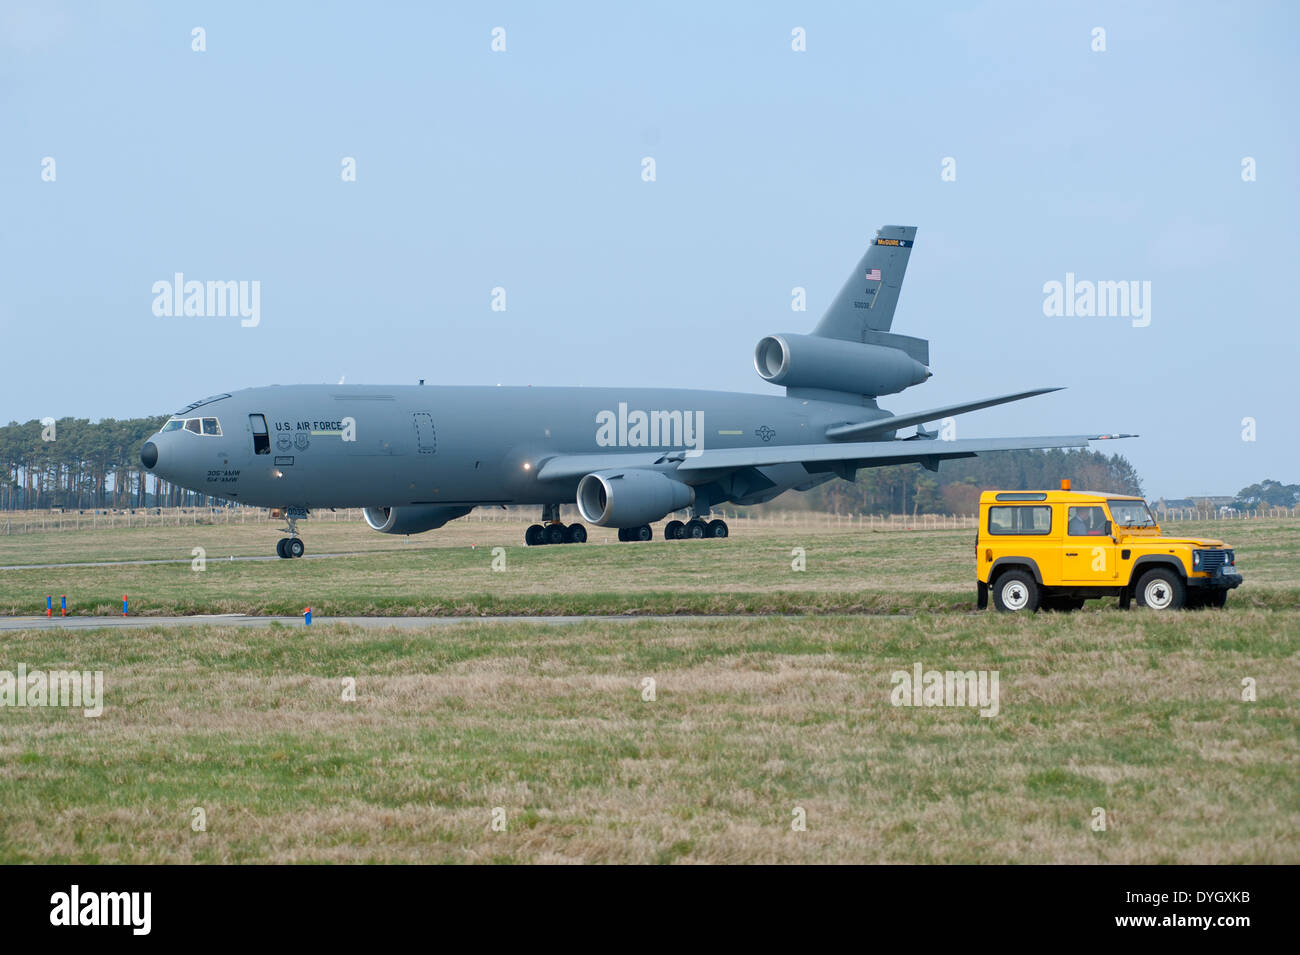 American McDonnell Douglas KC-10 Extender AMW Military Aircraft at RAF Lossiemouth, Scotland. SCO 9052. Stock Photo